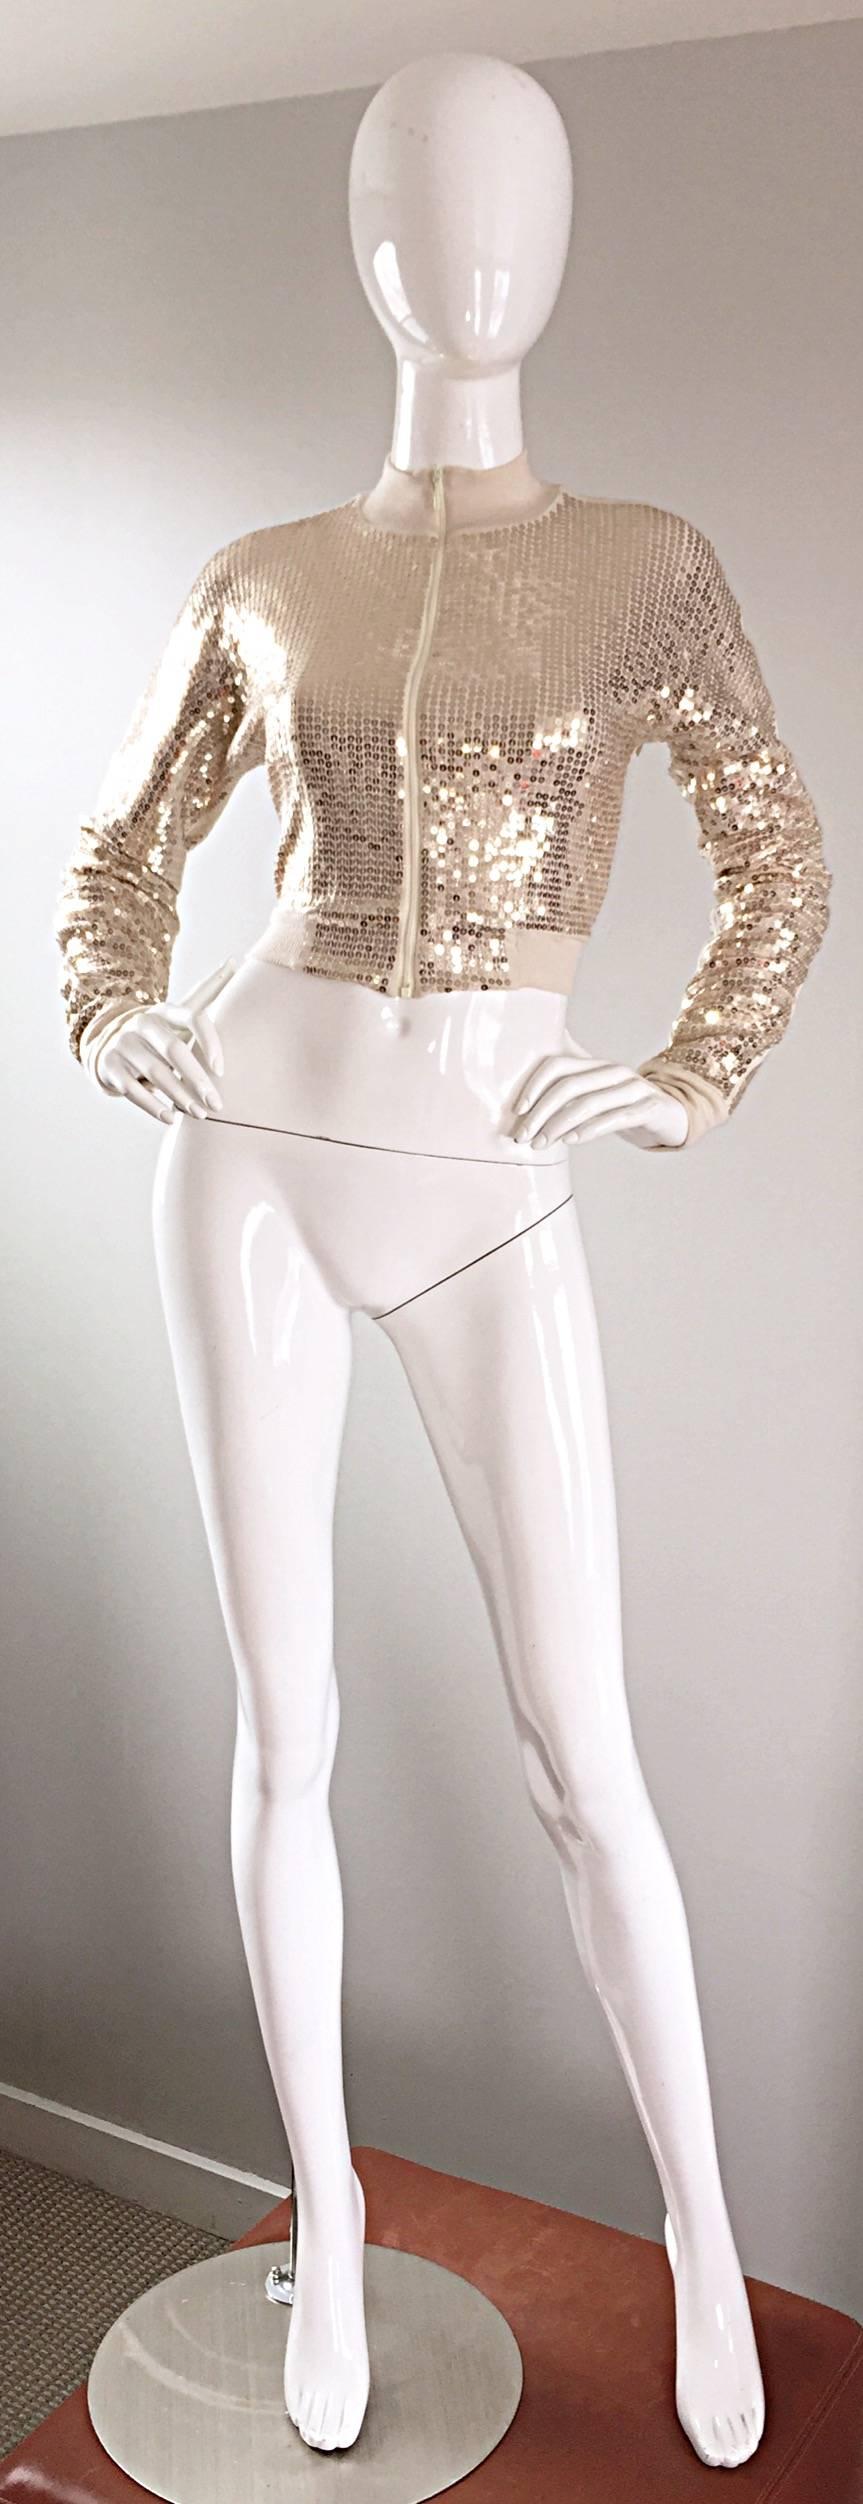 Fabulous FLAVIO CASTELLANI gold sequin 'disco ball' crop jacket! Features all over hand-sewn gold sequins throughout. Soft viscose stretches to fit. Fully lined. Never worn. Great with jeans, shorts, a skirt, or over a dress. In great unworn